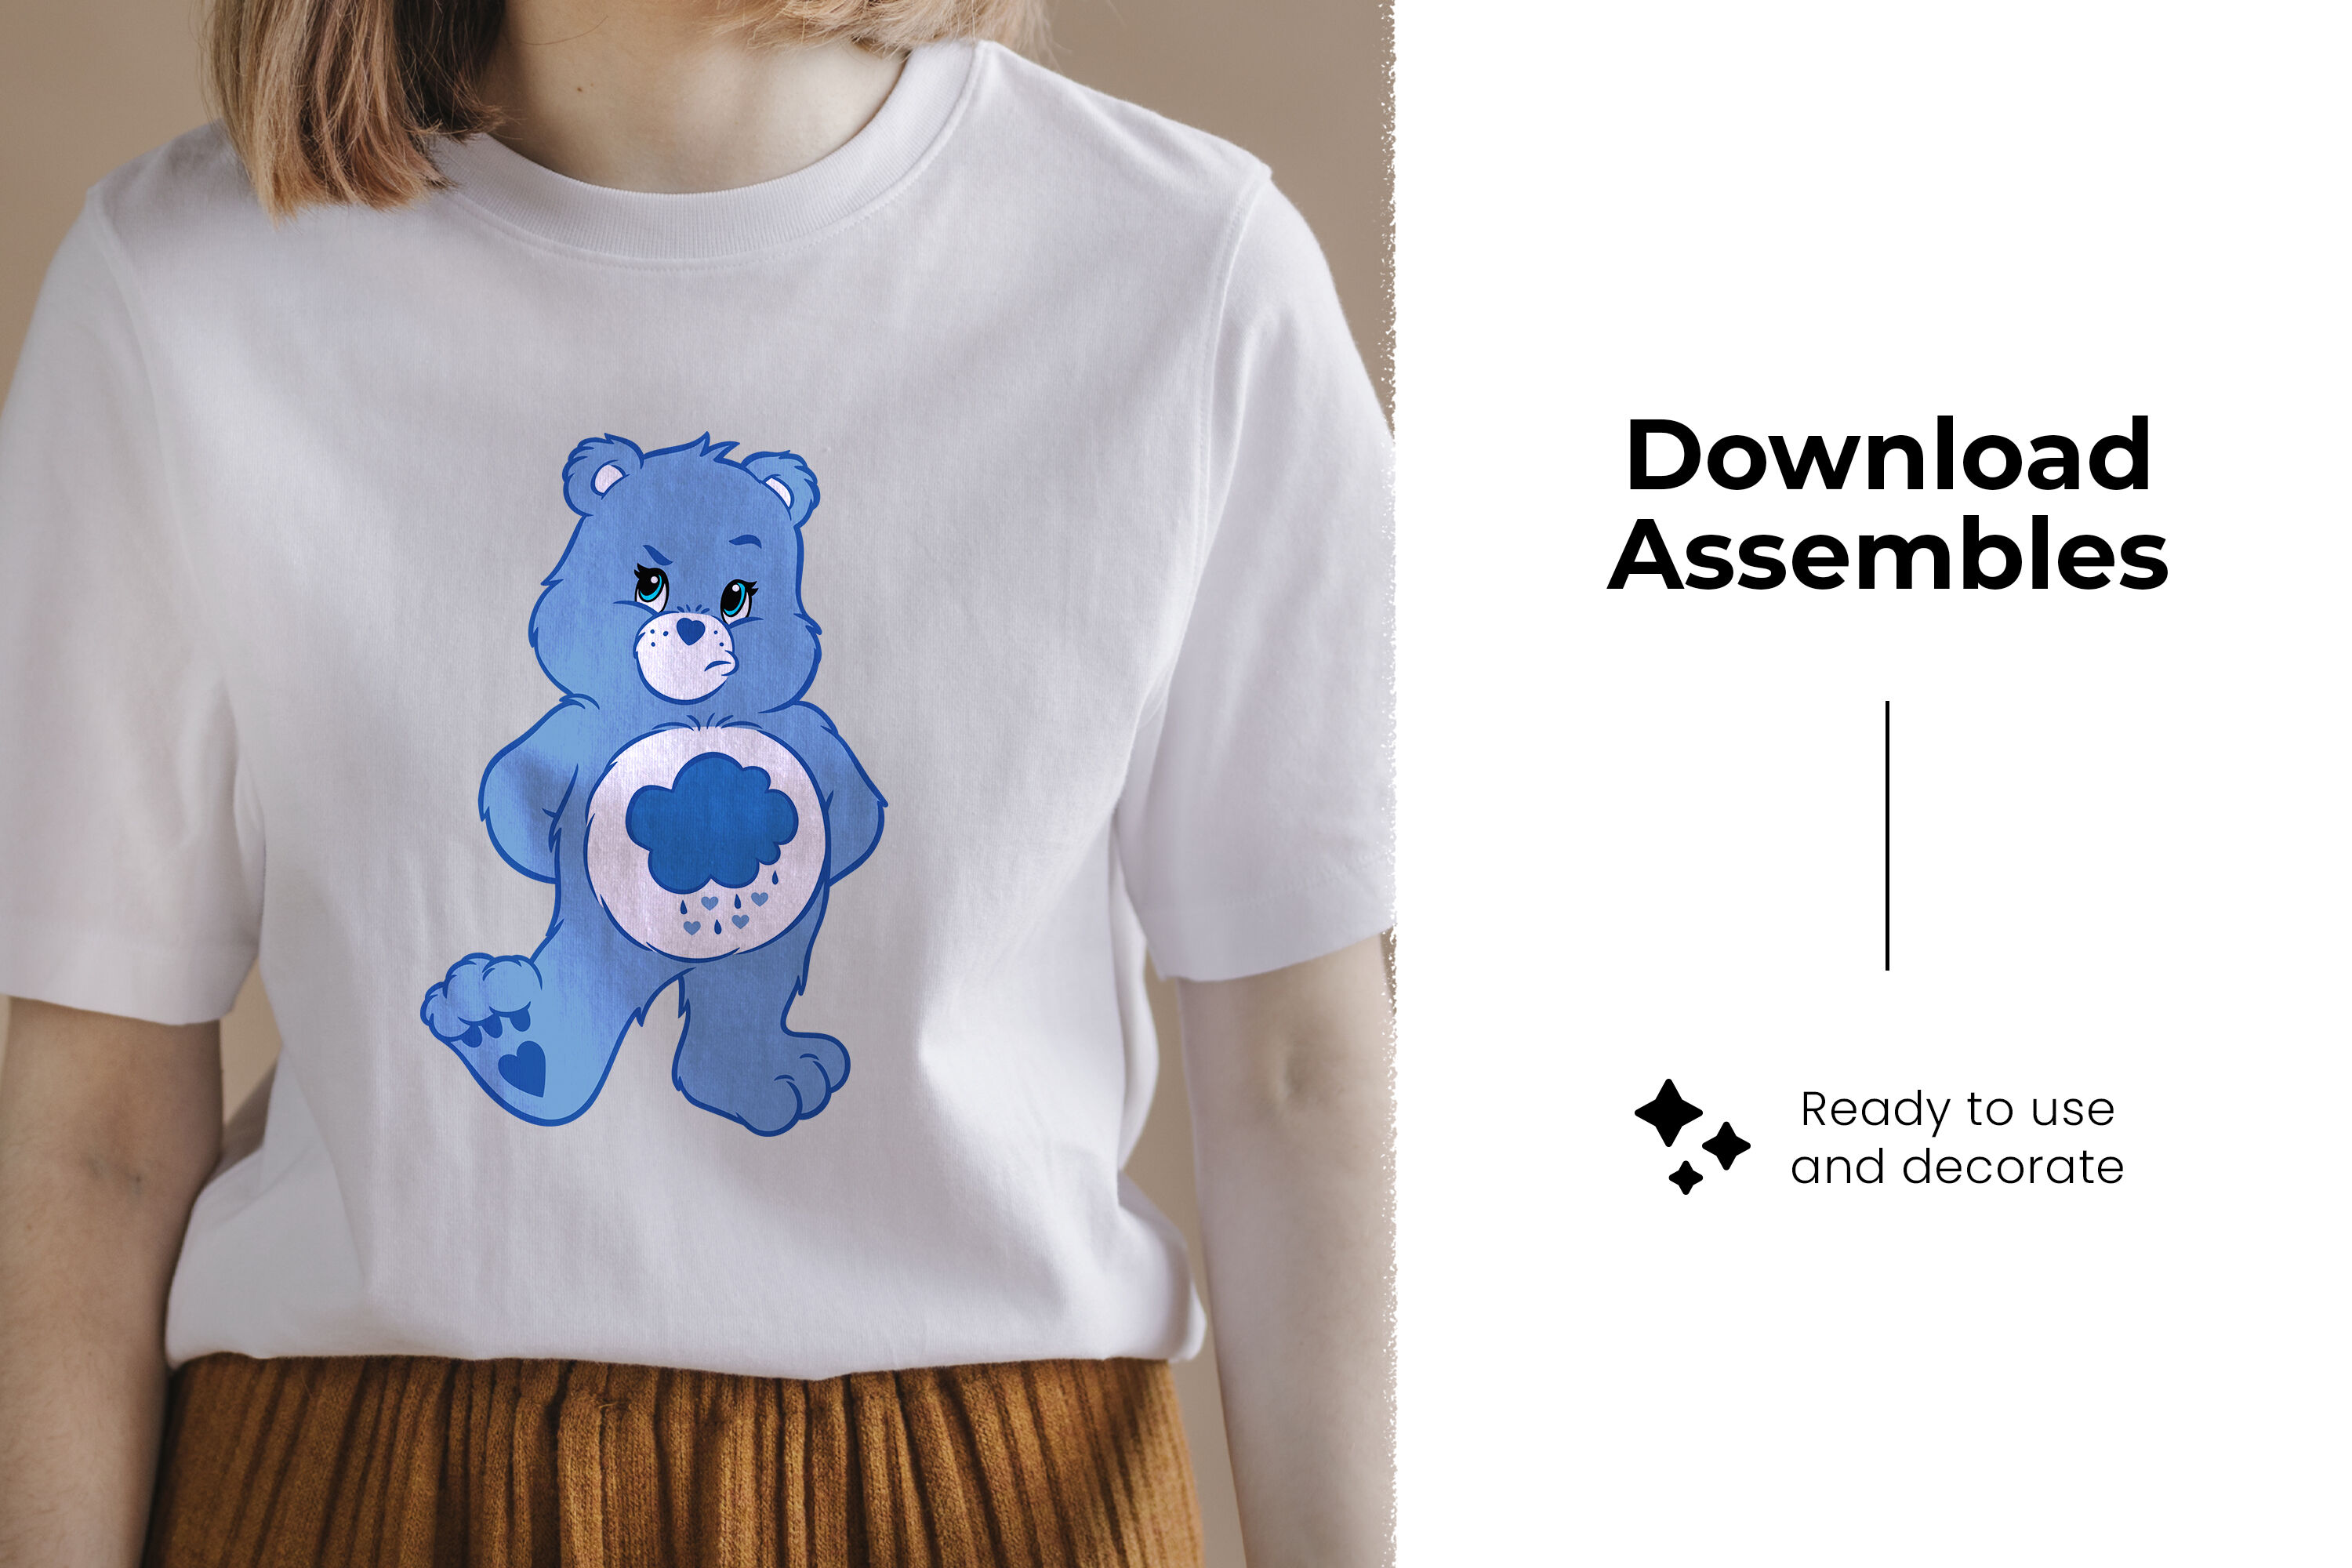 Care Bears SVG PNG, Colorful Bears Bundle - Instant Download